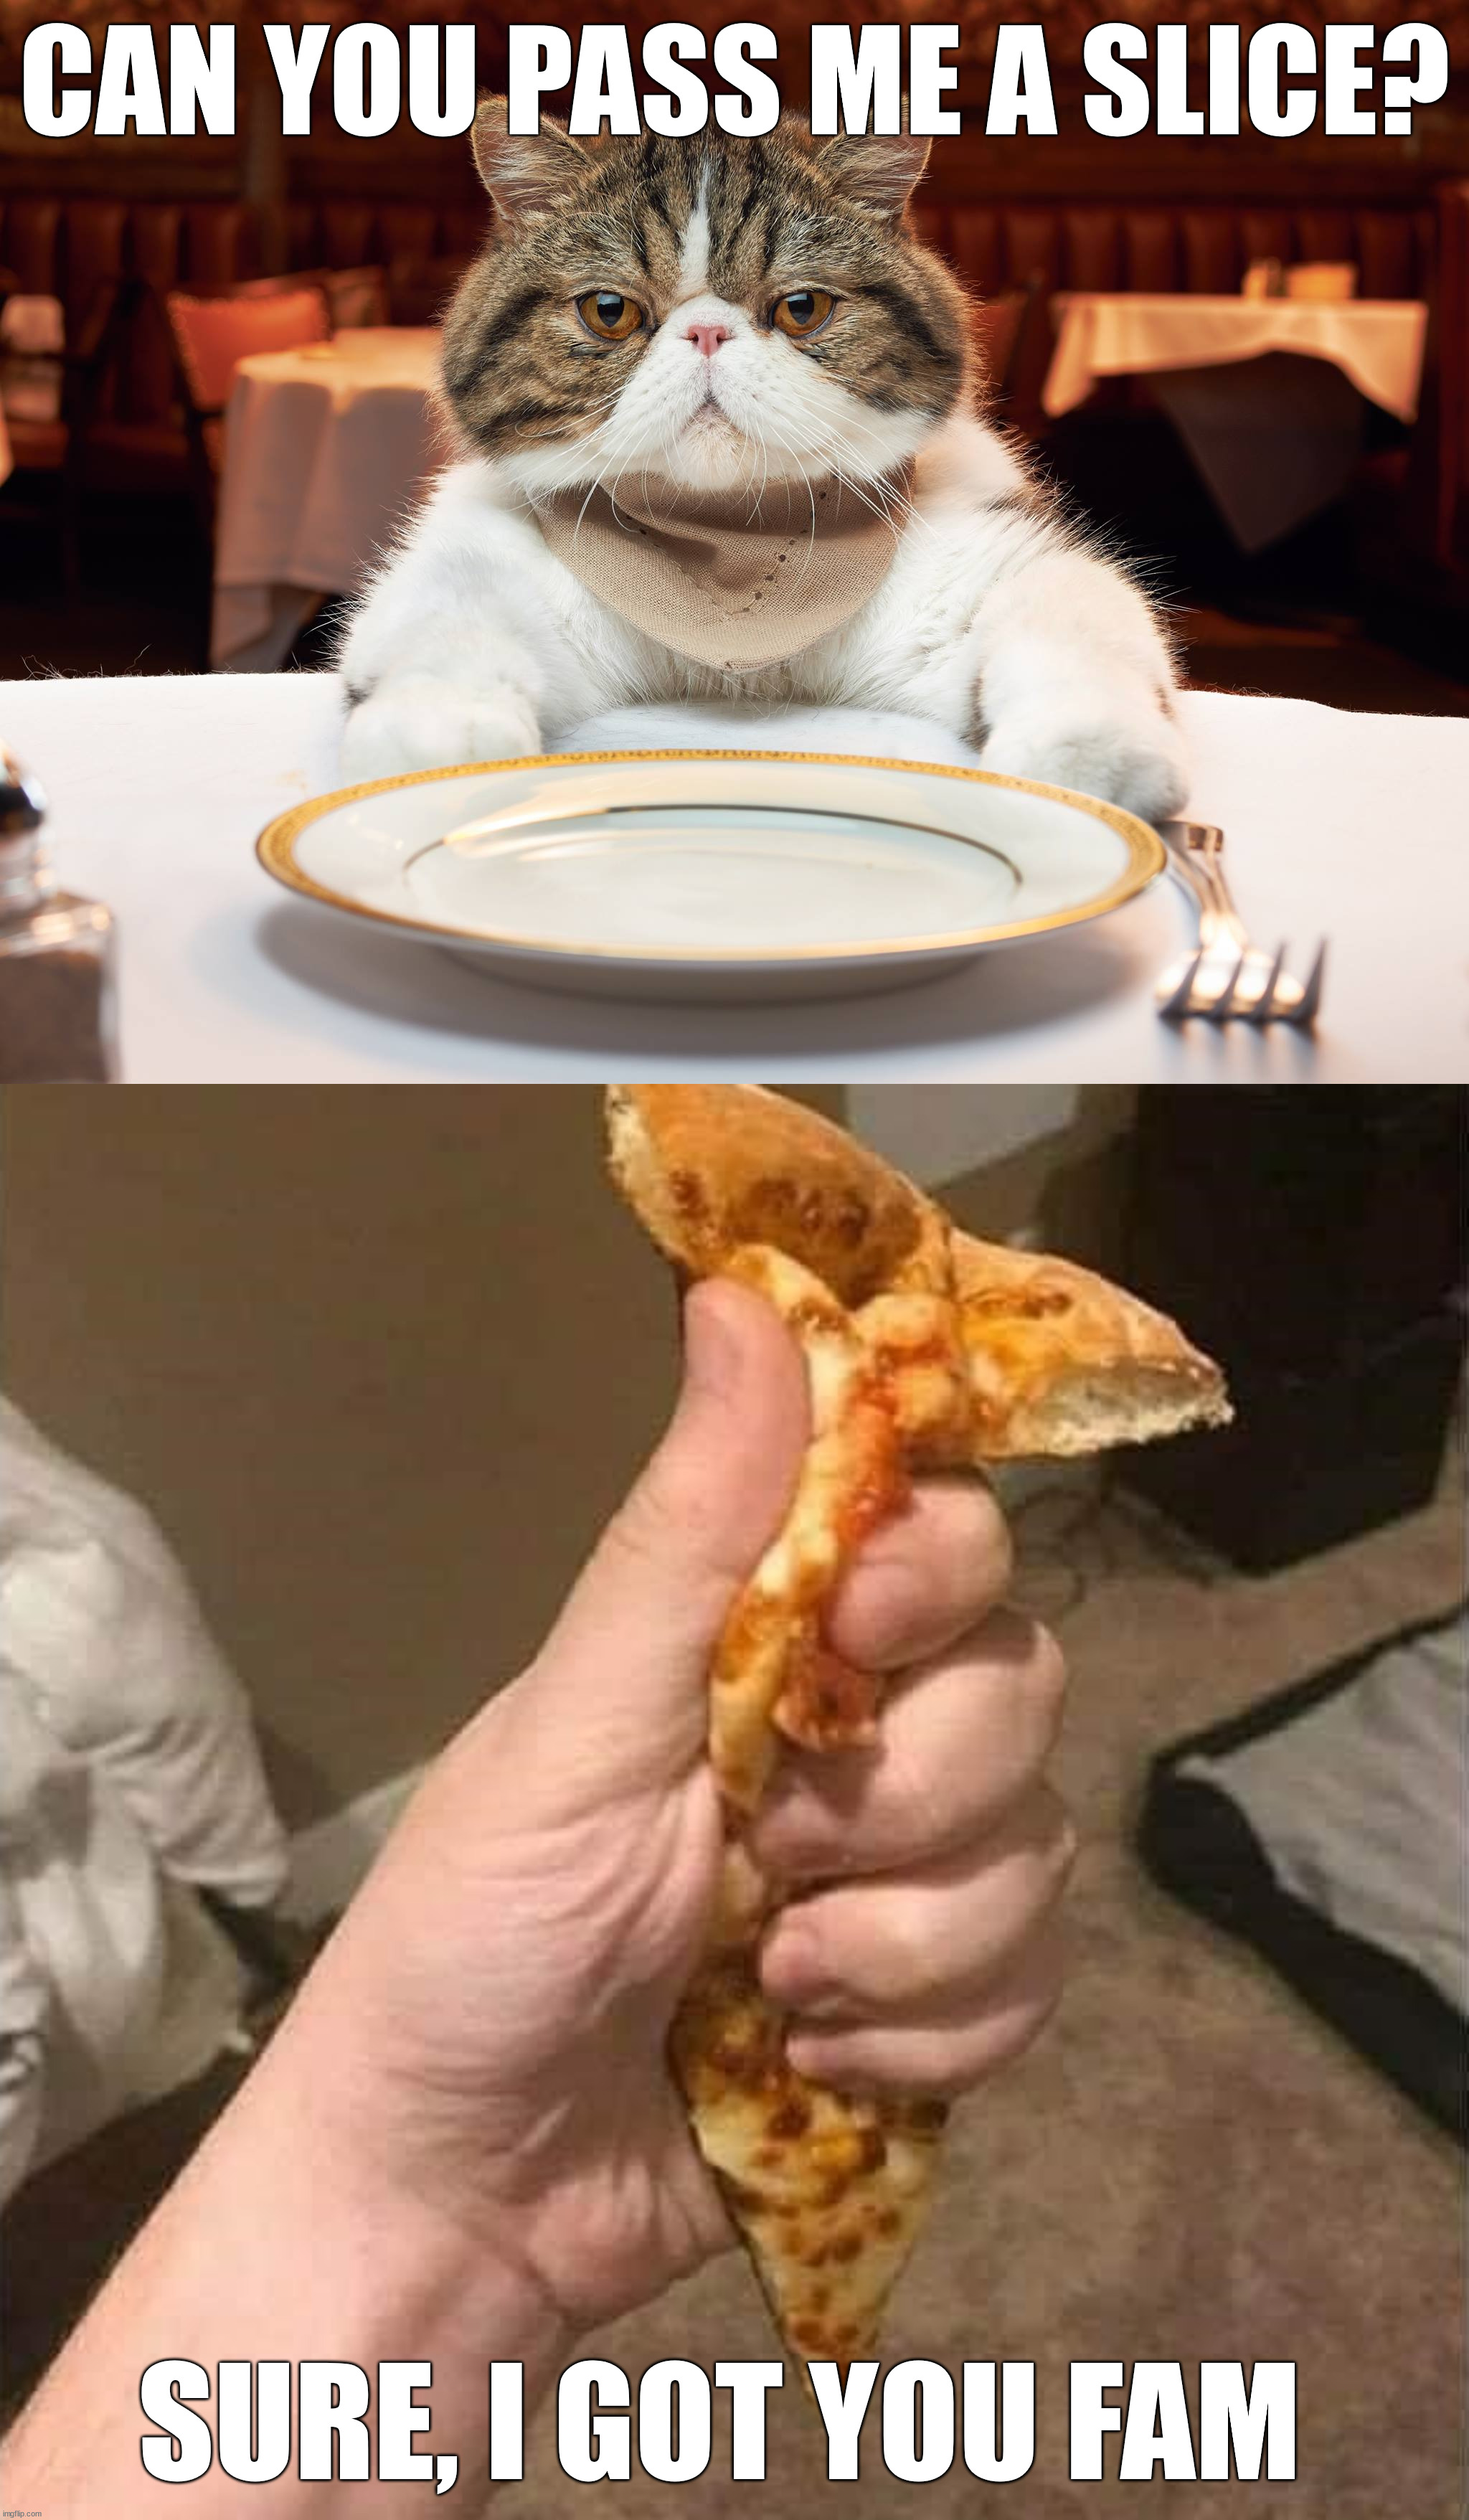 Pass me a slice | CAN YOU PASS ME A SLICE? SURE, I GOT YOU FAM | image tagged in hungry cat,pizza time stops,pizza,slice,you shall not pass | made w/ Imgflip meme maker